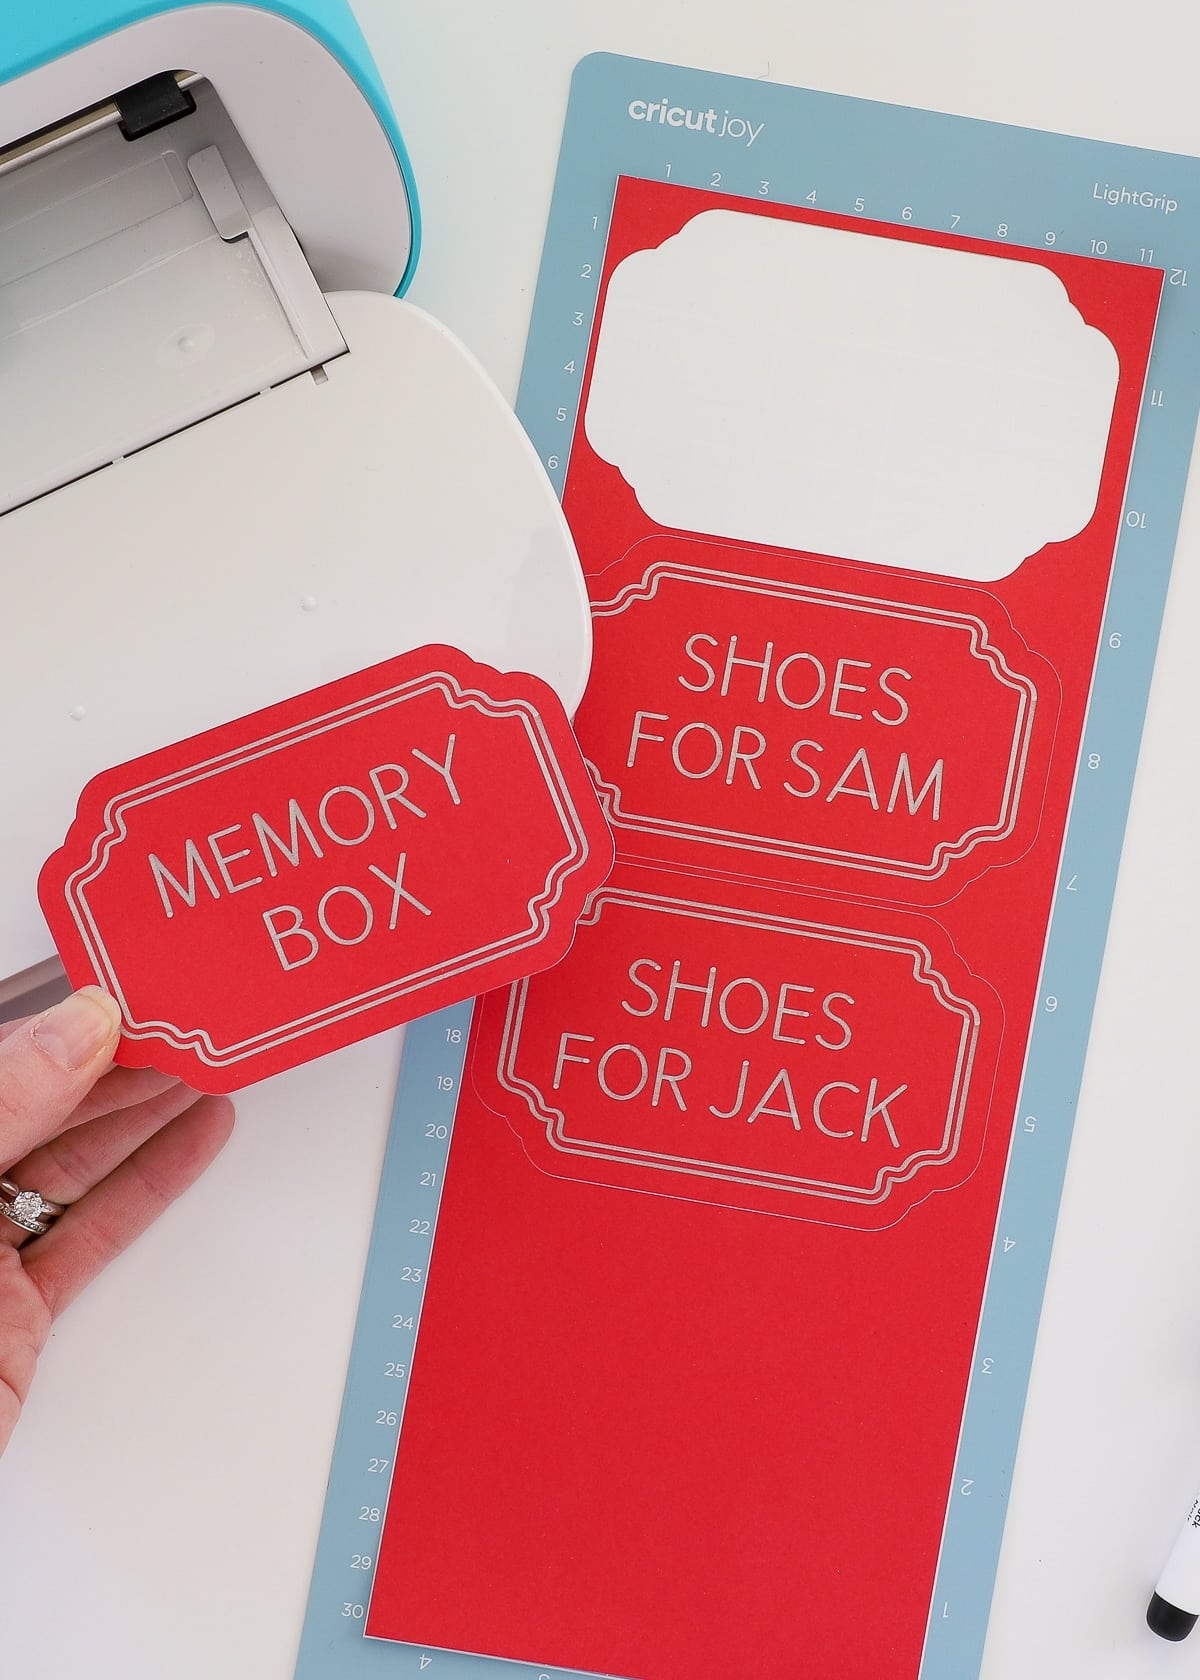 Hand holding red labels next to Cricut Joy